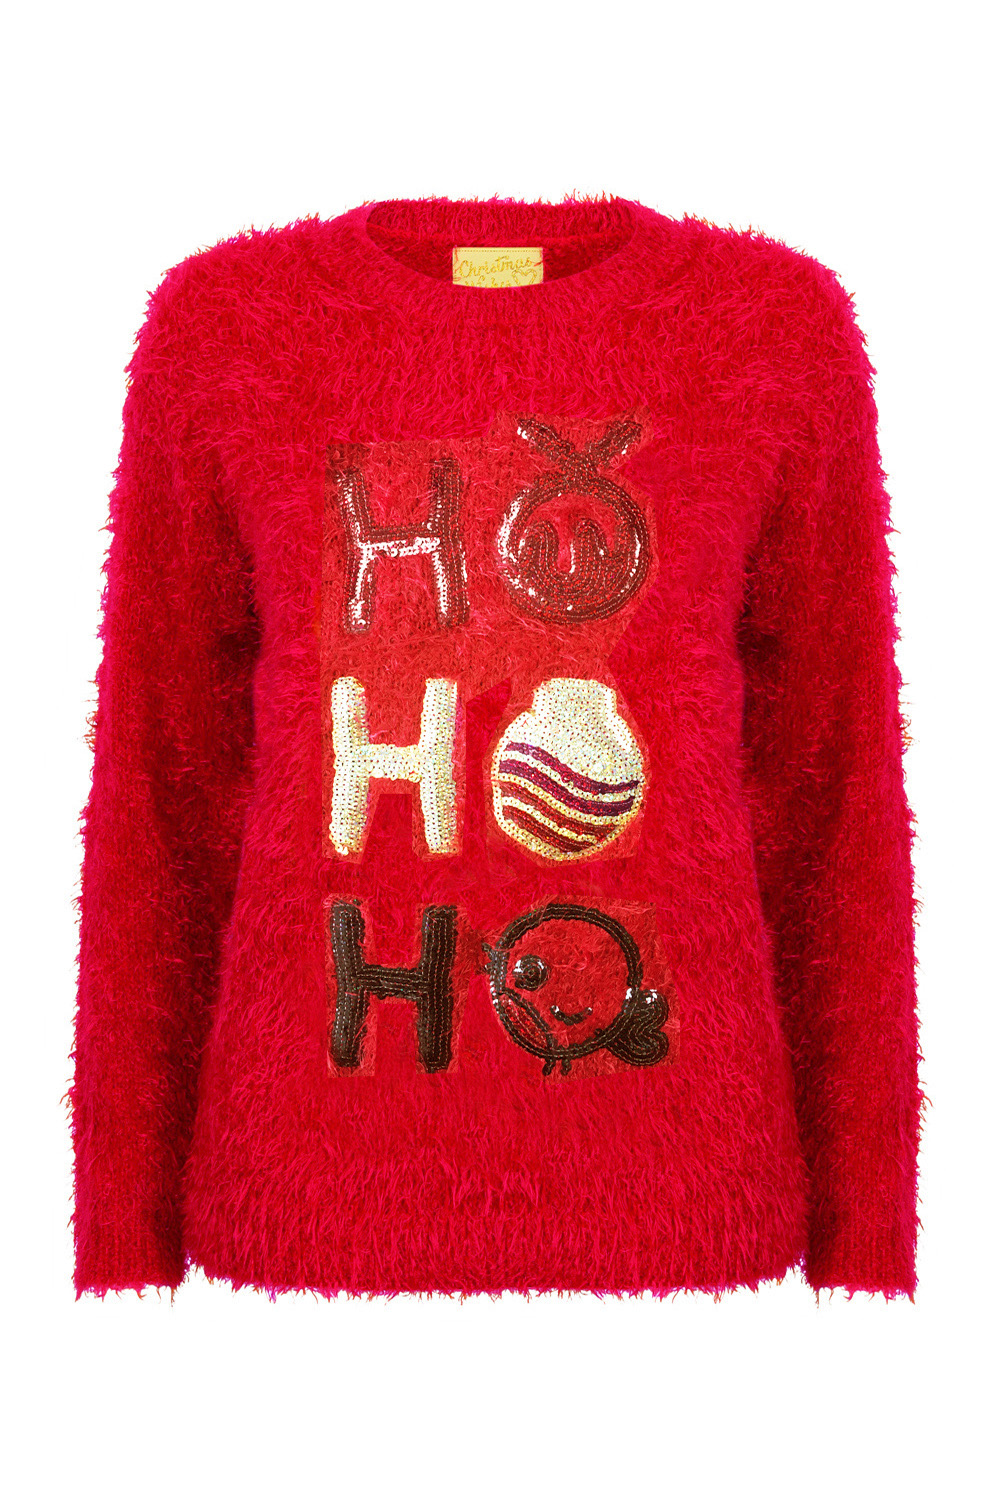 Christmas Wishes Womens 3D Ho Ho Ho Sequin Festive Jumper Ladies Sequin Sweater